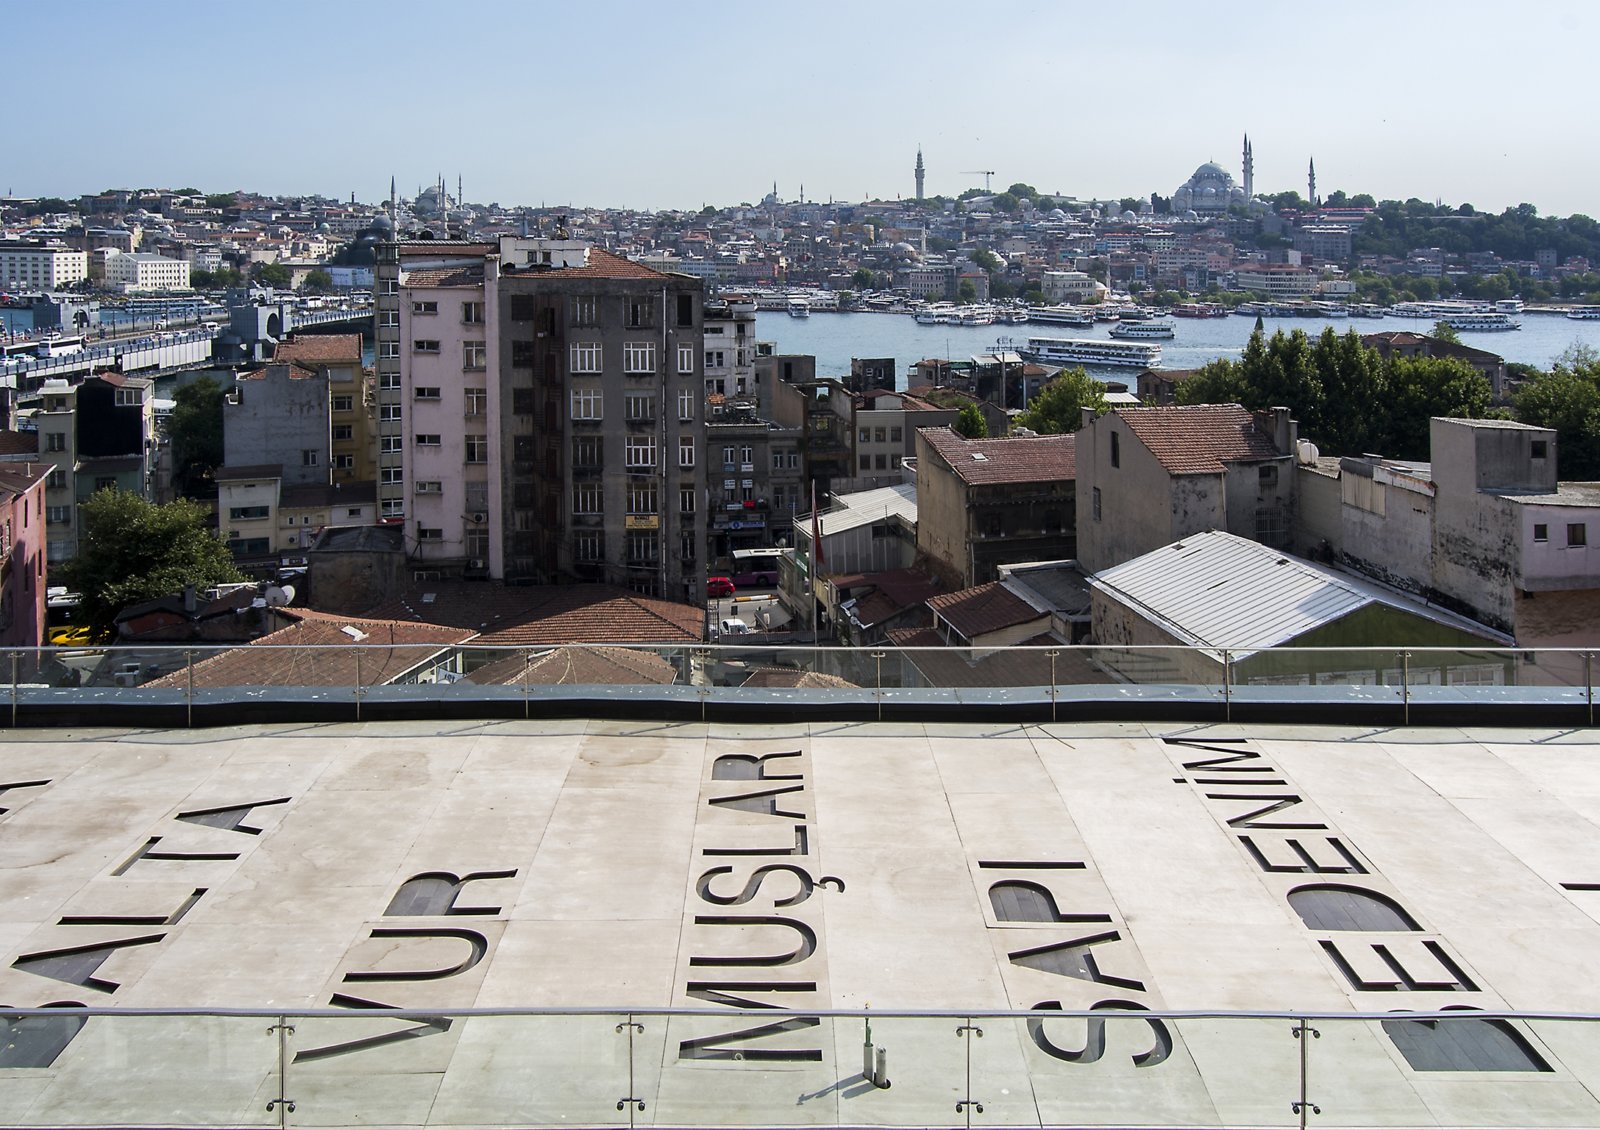 Abbas Akhavan, they struck a tree with an axe…, 2017, plywood walls from SALT Beyoğlu, cut and placed on the roof of SALT Galata, 3043 x 887 in. (7730 x 2255 cm). Installation view, “they hit a tree with an axe”, SALT Galata, Istanbul, Turkey, 2017